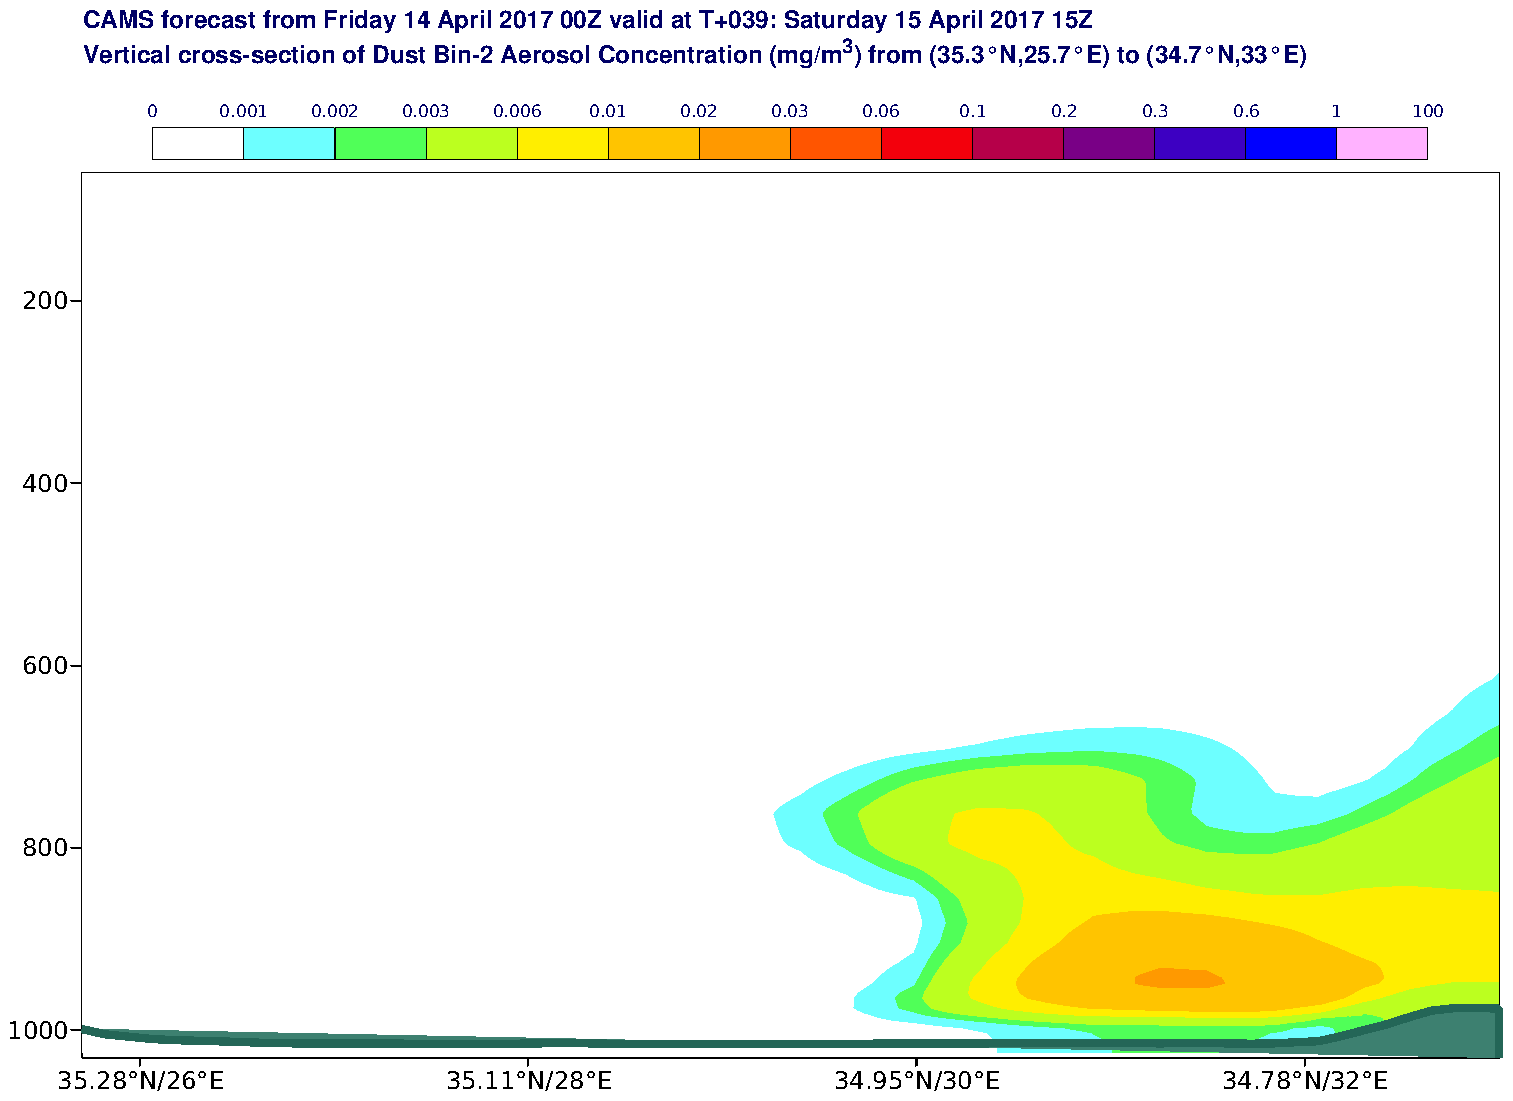 Vertical cross-section of Dust Bin-2 Aerosol Concentration (mg/m3) valid at T39 - 2017-04-15 15:00